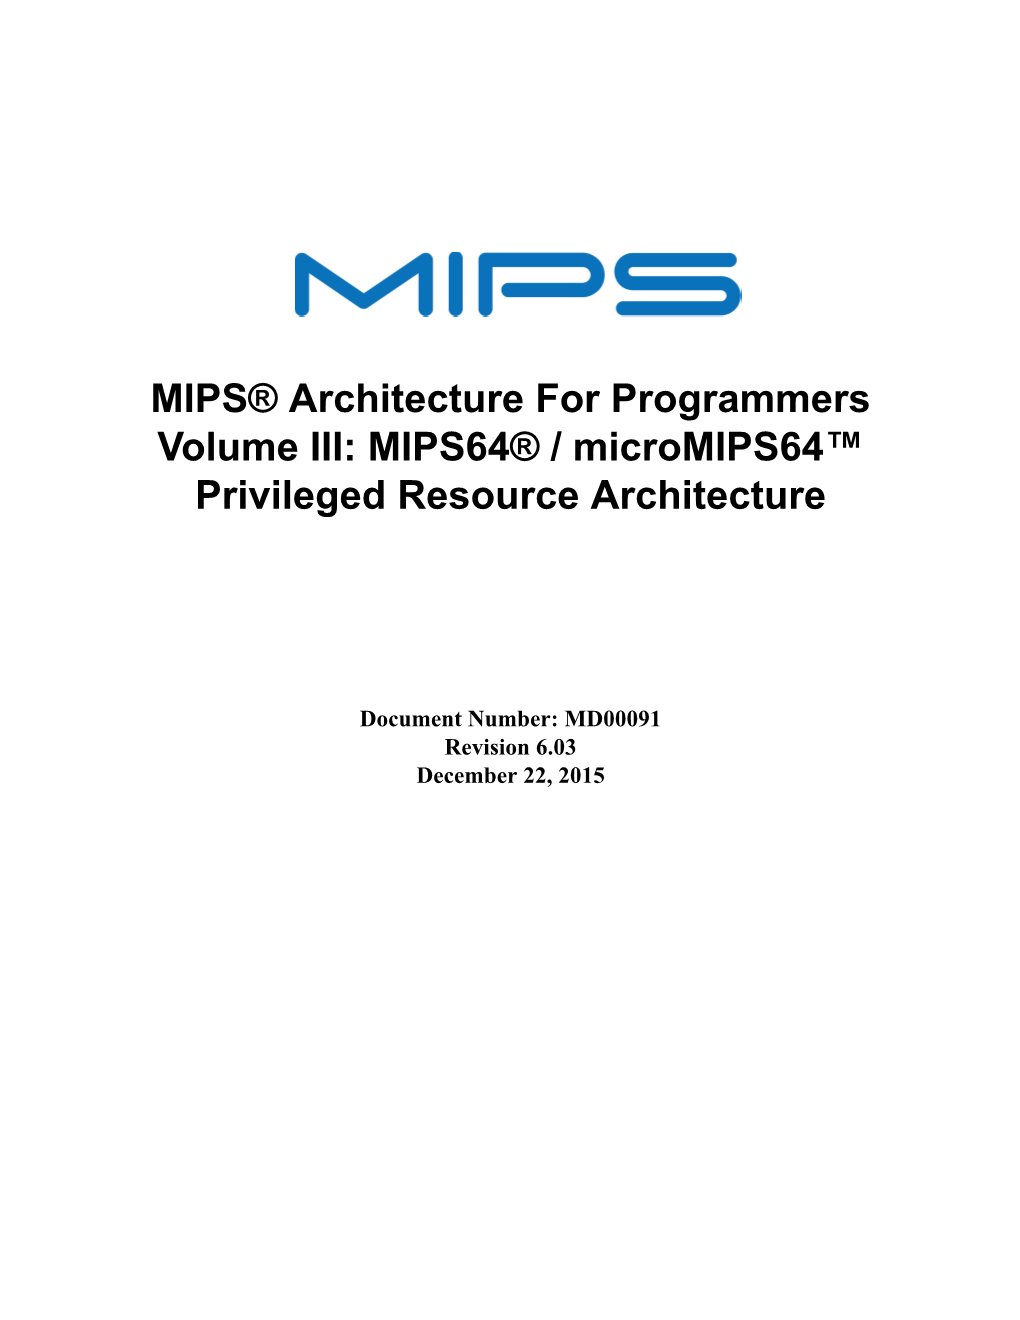 MIPS® Architecture for Programmers Volume III: MIPS64® / Micromips64